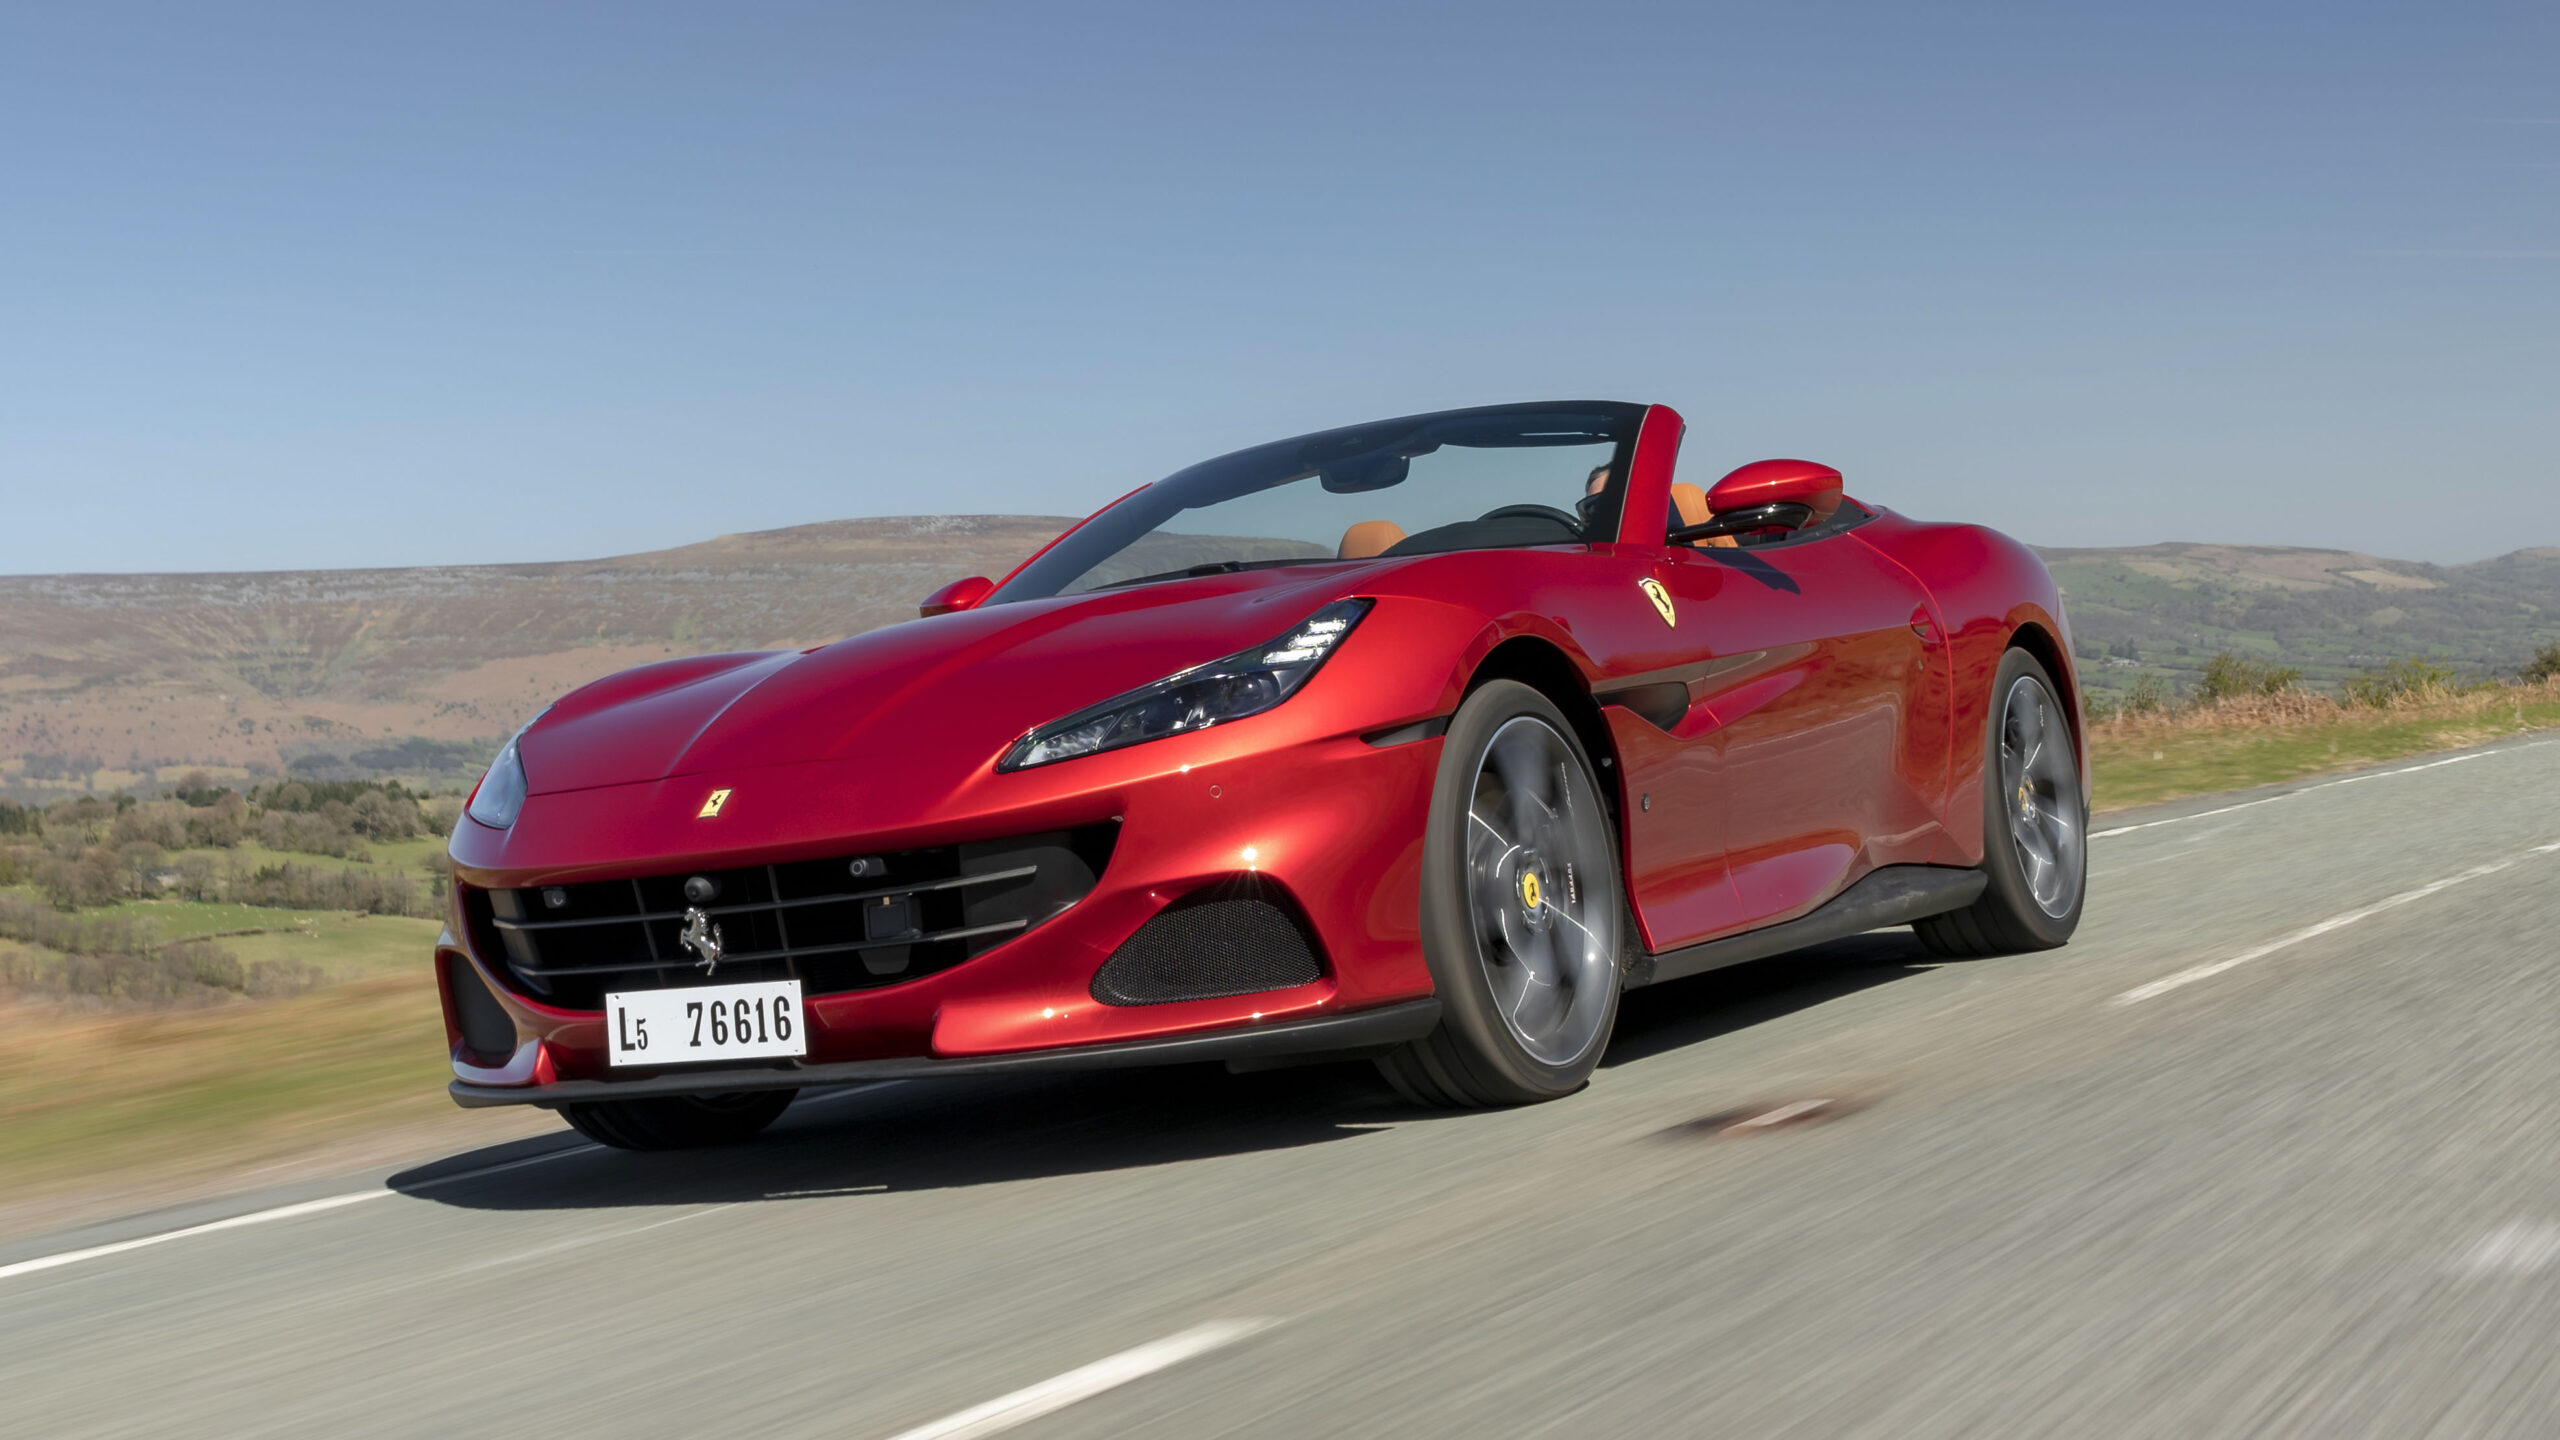 Australian Ferrari Owner Recklessly Flouts Speed Limits, Loses Car & License